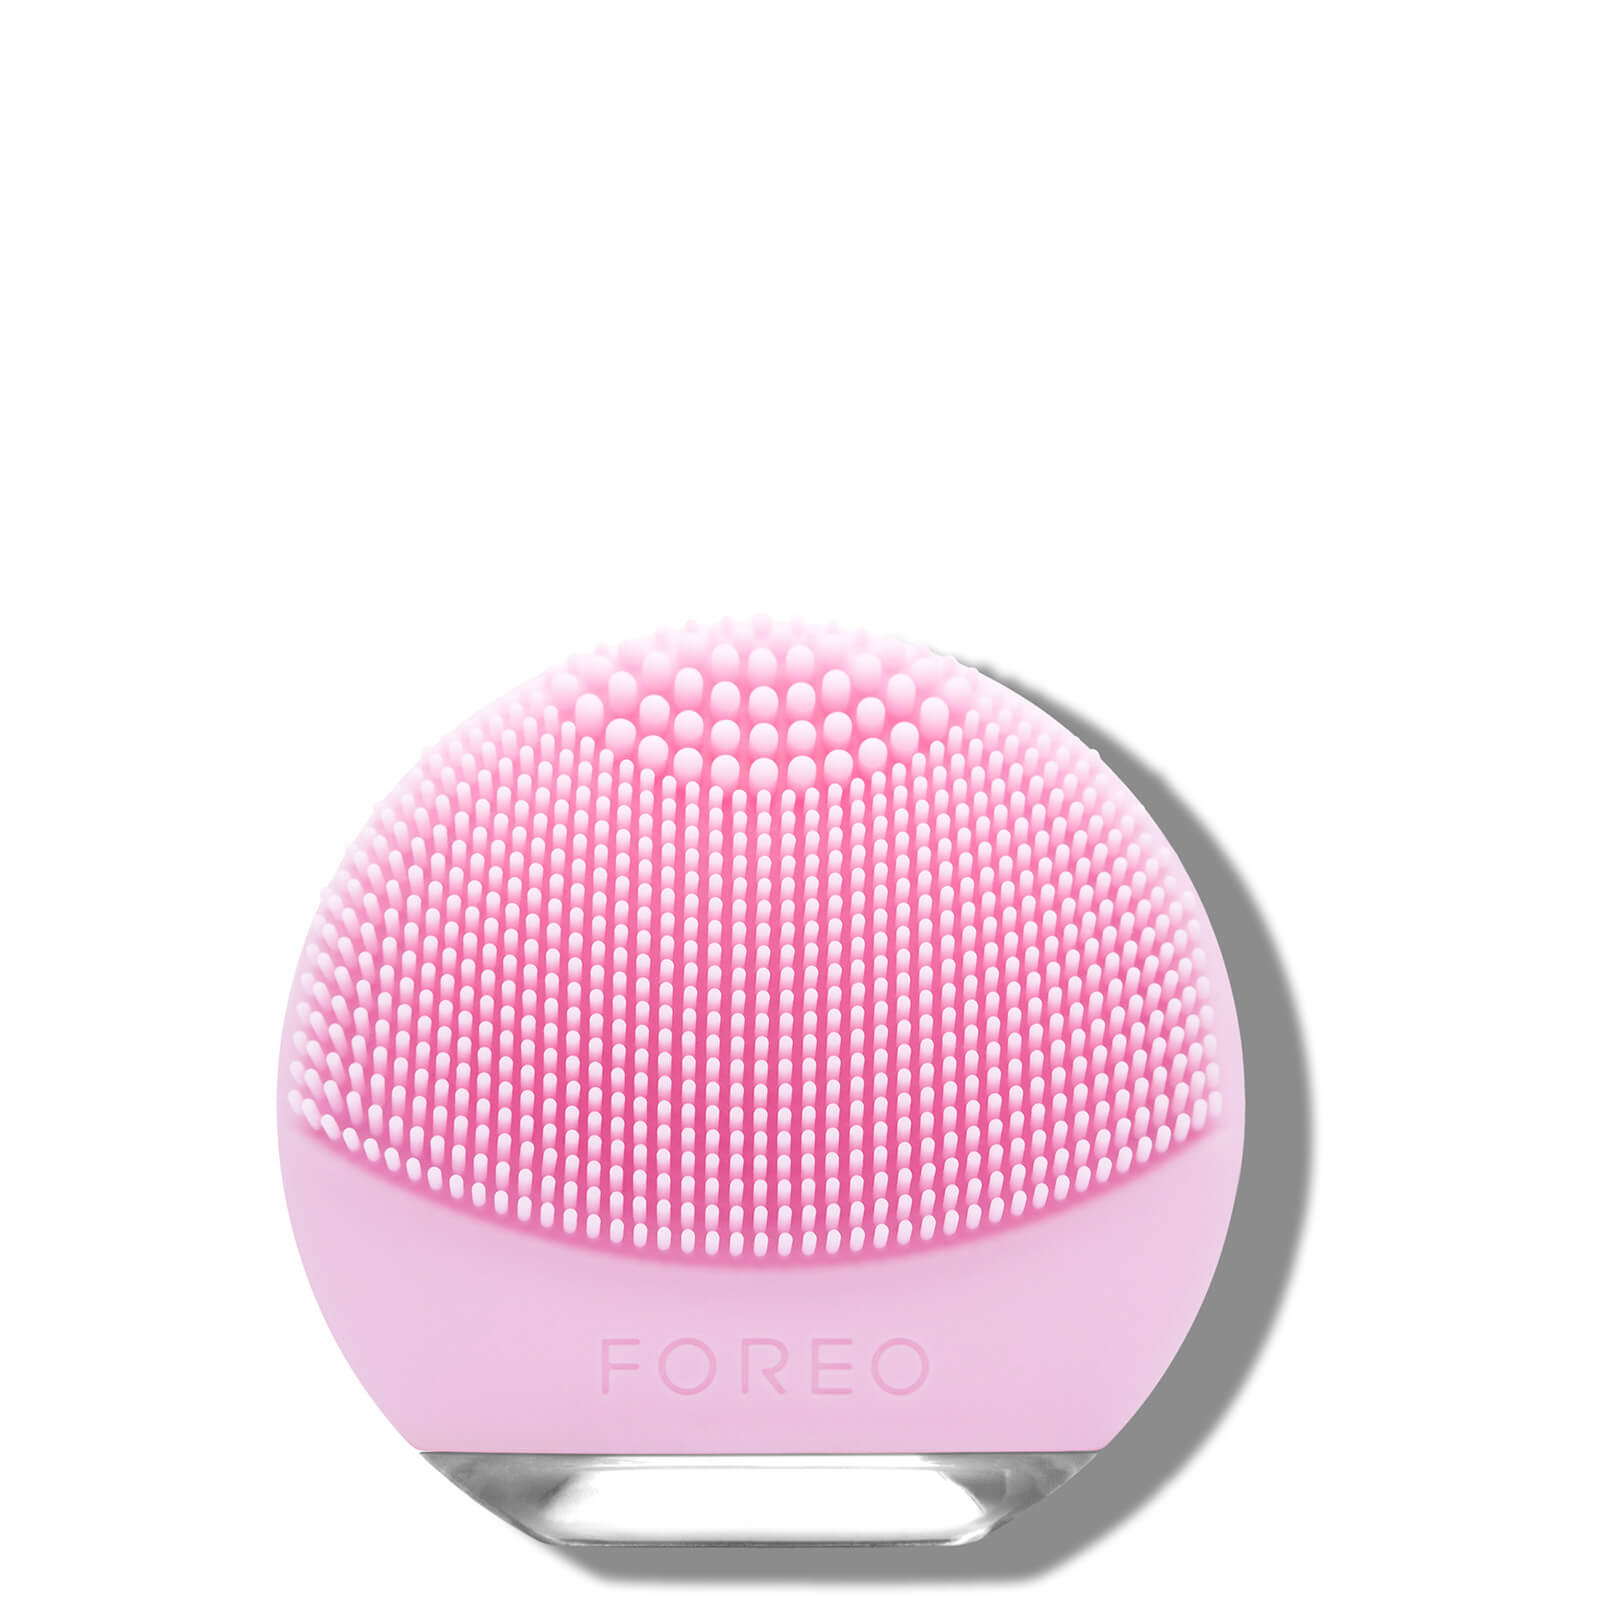   LookFantastic FOREO LUNA Go Travel-Friendly Anti-Ageing and Facial Cleansing Brush (Various Options) - For Normal Skin